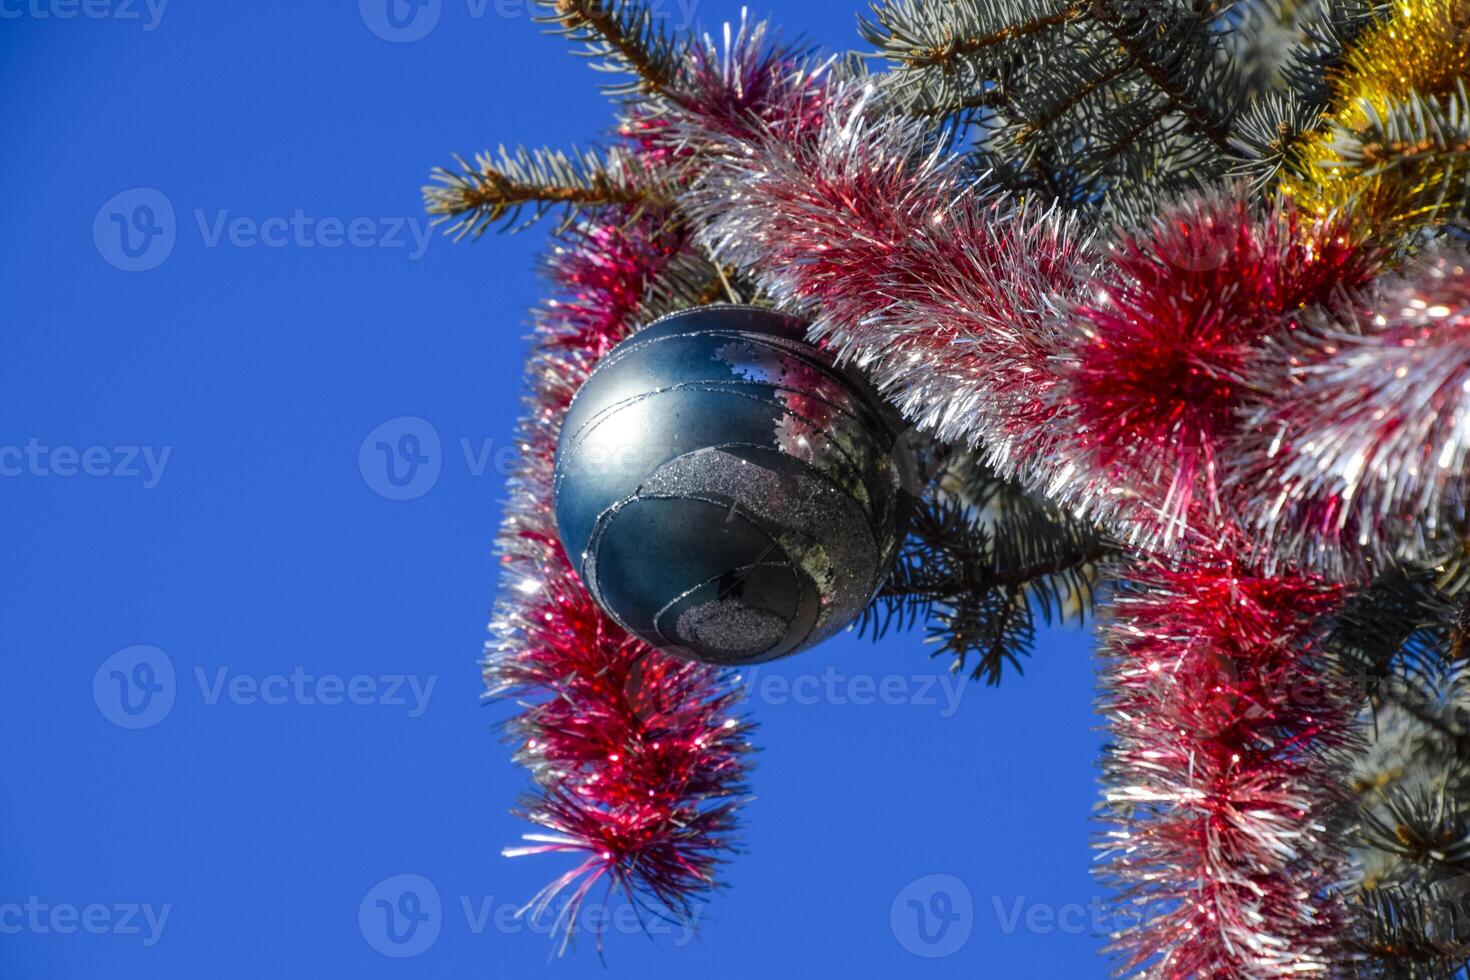 Decorations New Year tree. Tinsel and toys, balls and other decorations on the Christmas Christmas tree standing in the open air. photo